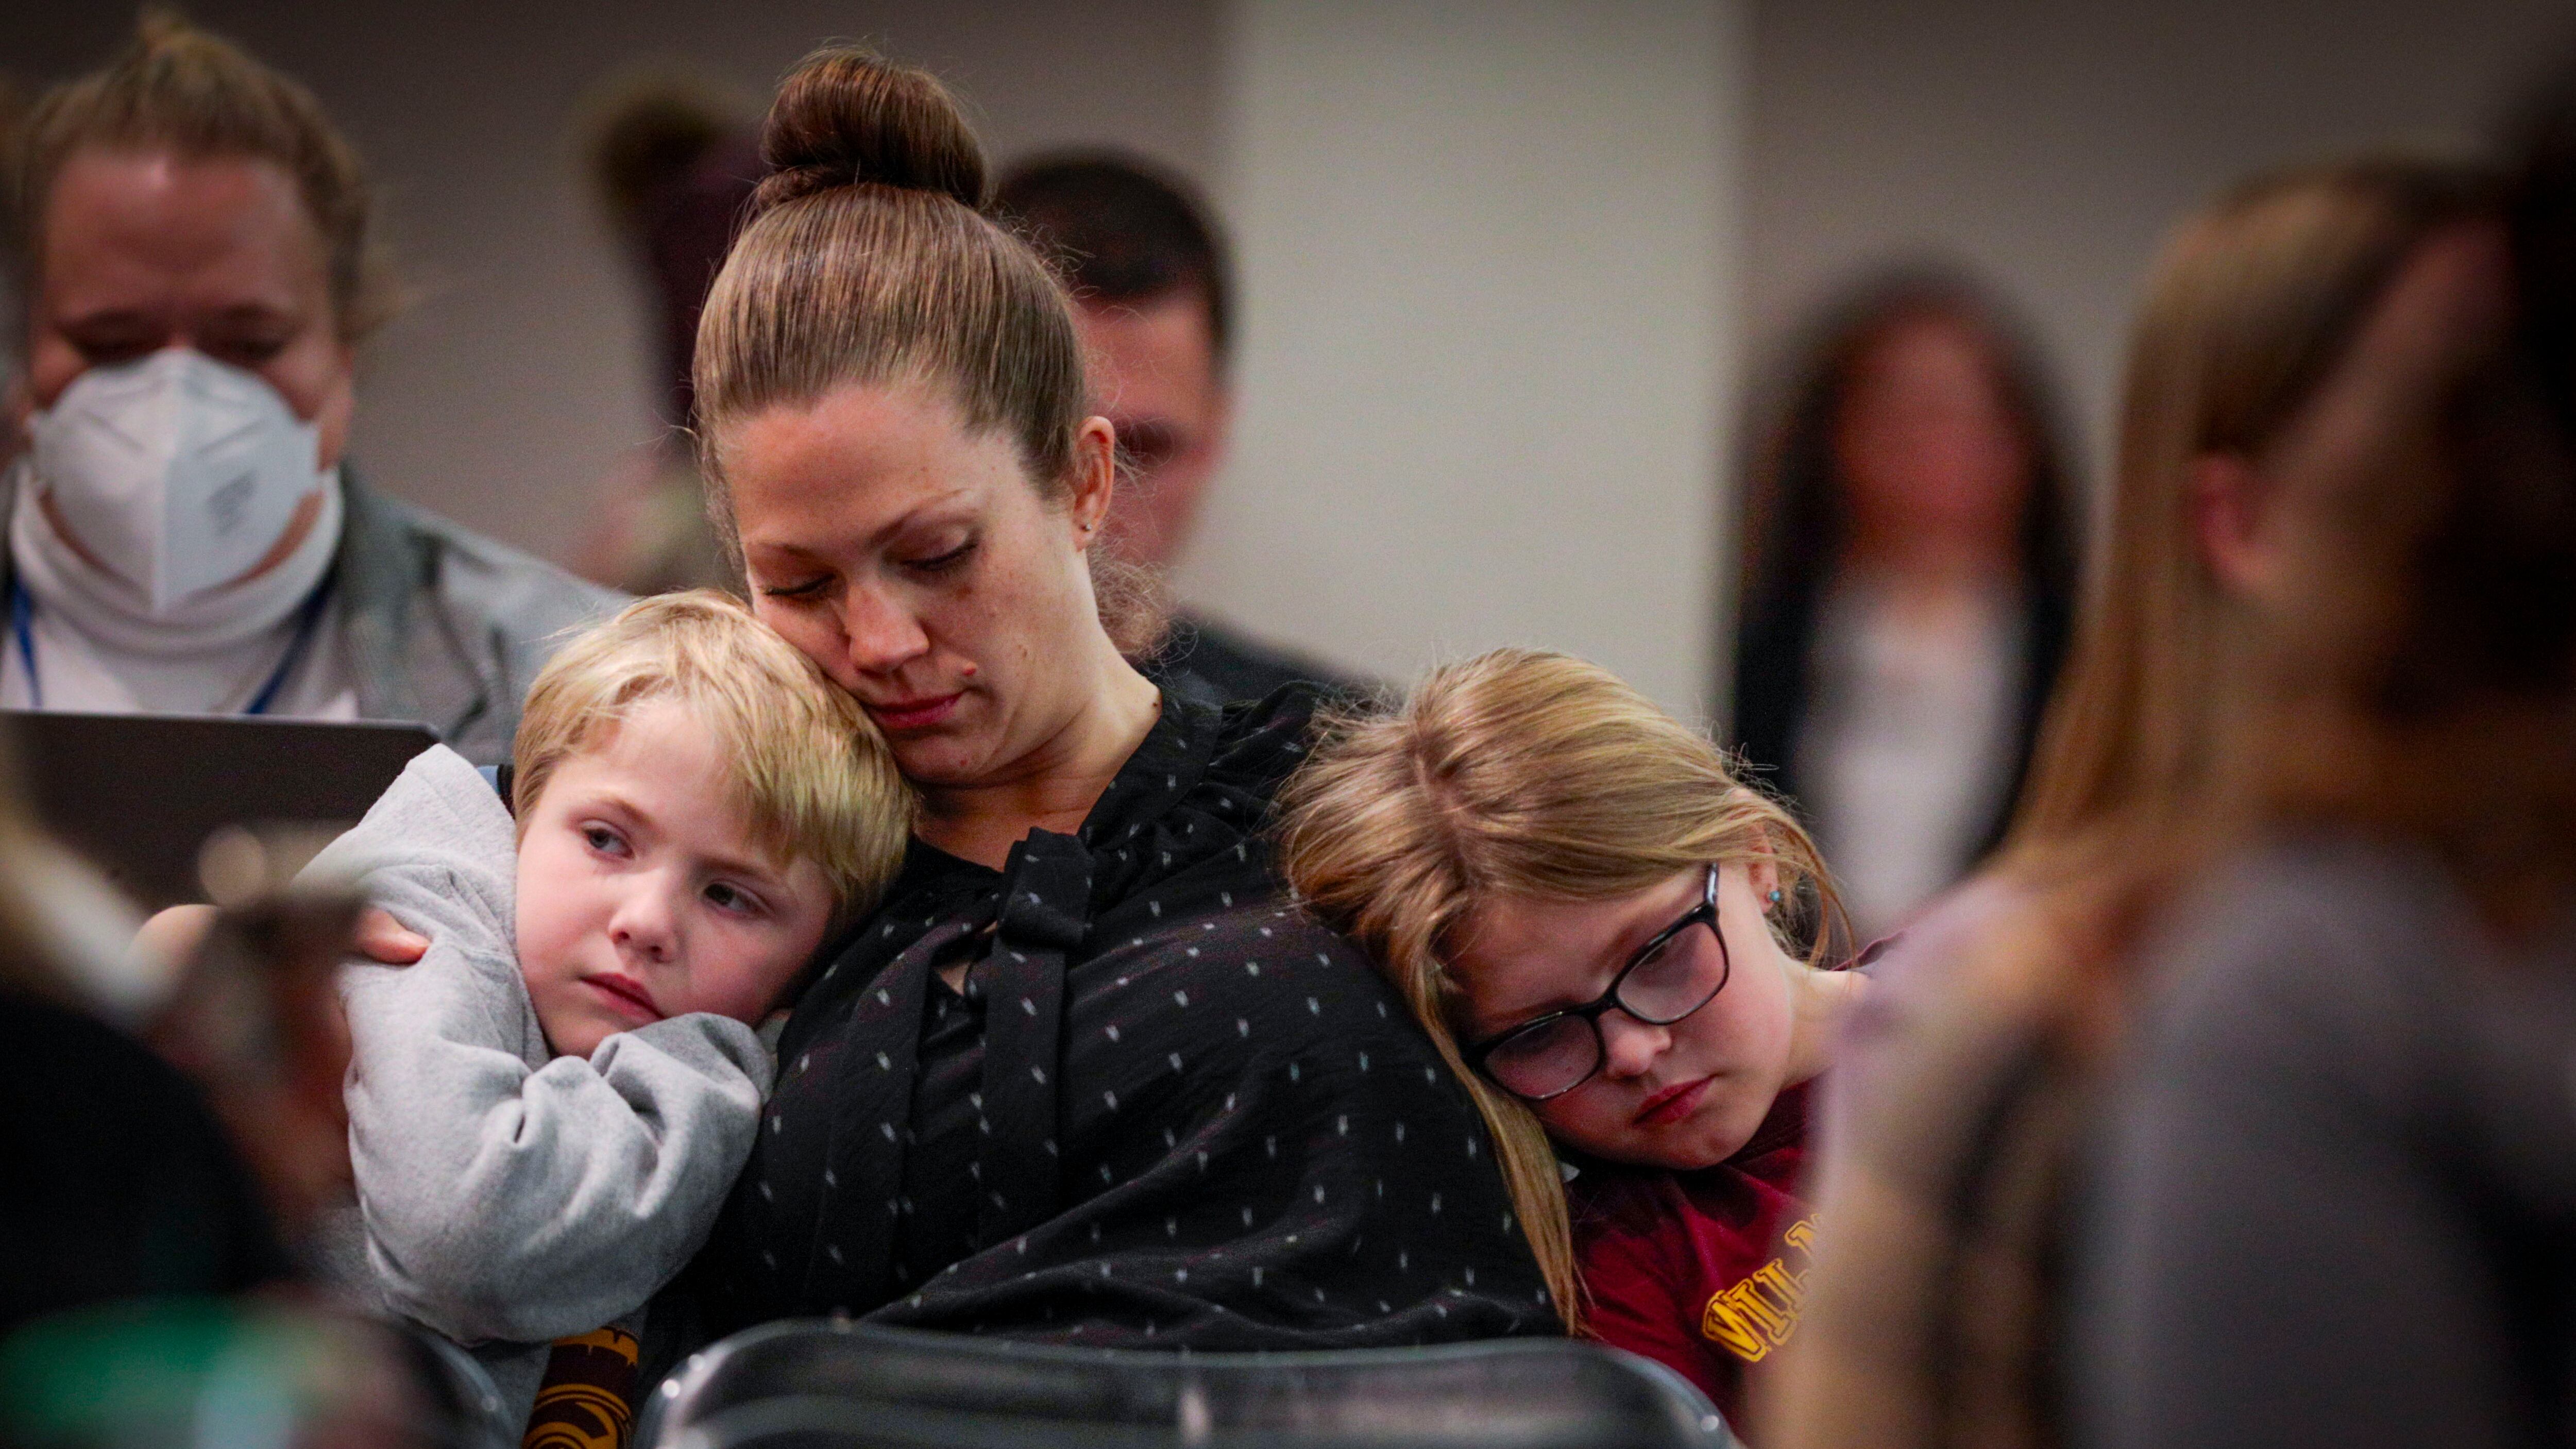 A woman with her hair pulled up in a bun comforts two children who nestle against her. She’s sitting in a crowded room surrounded by people.